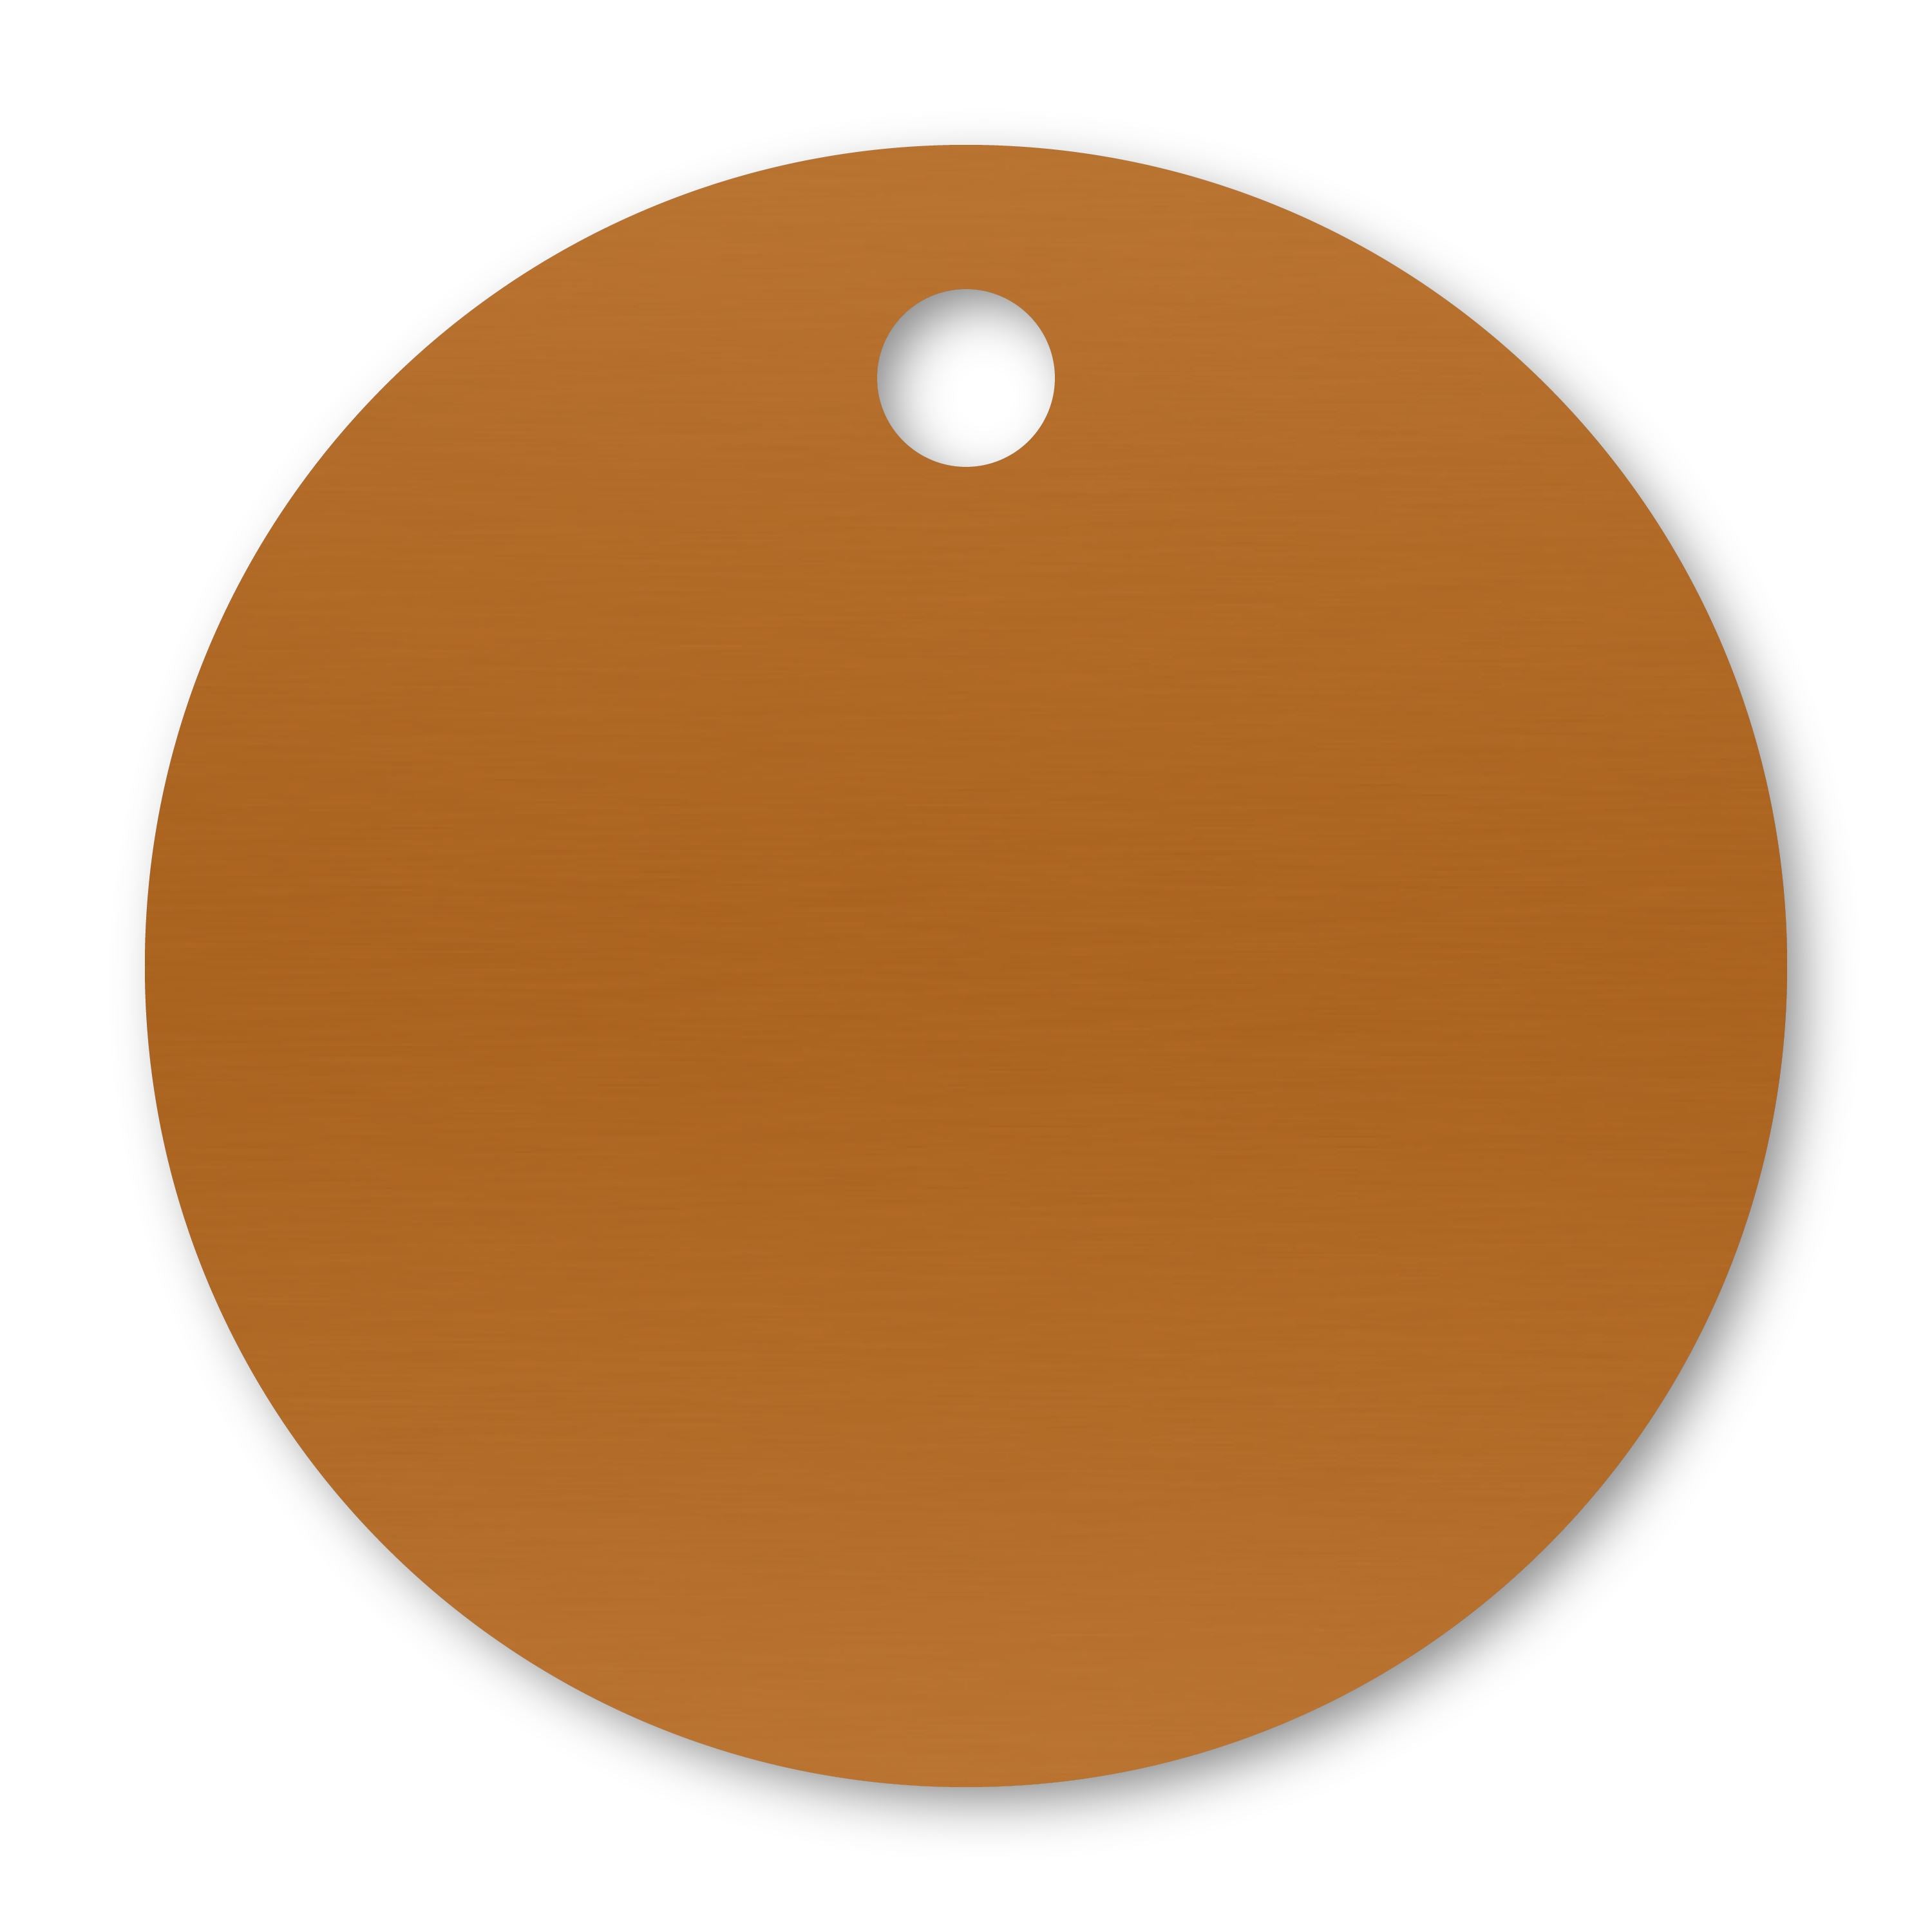 Anodized Aluminum Round Tags, 1-1/2" with 1/8" Hole, Laser Engraved Metal Tags Craftworks NW Orange 